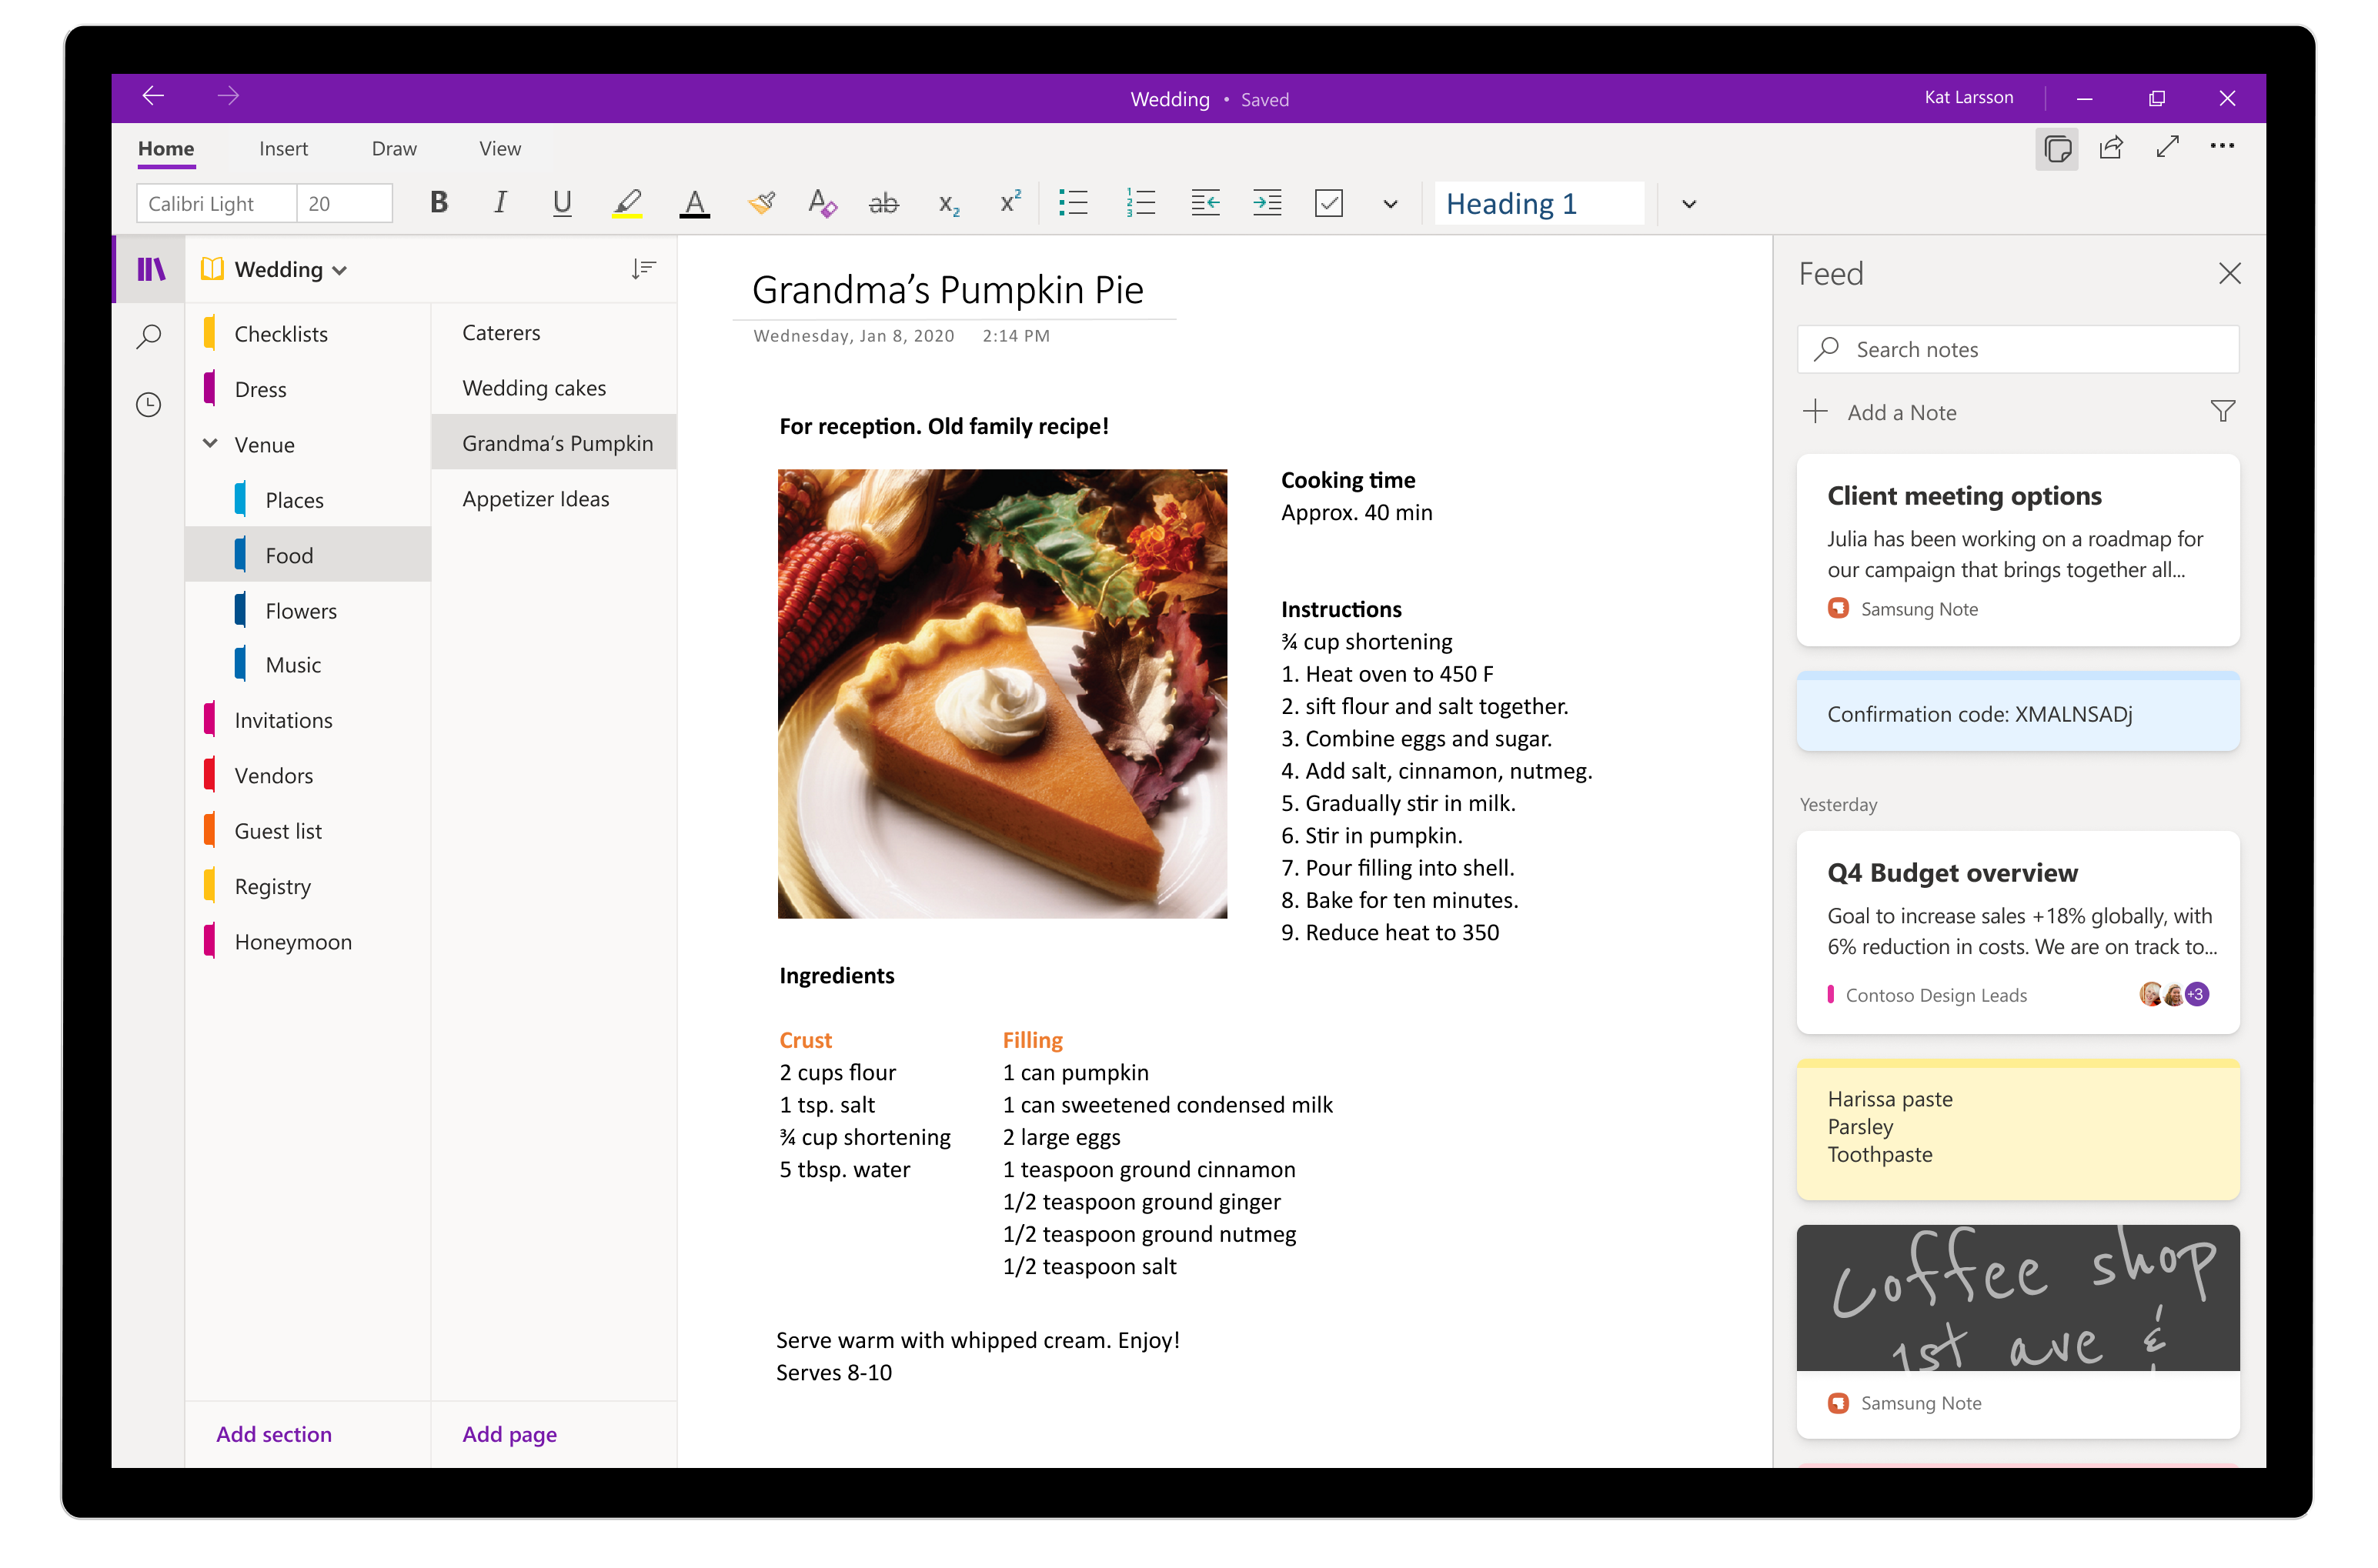 This image shows how you can reference your notes in a OneNote page  and capture any new thoughts by creating a Sticky Note in your feed without leaving OneNote.